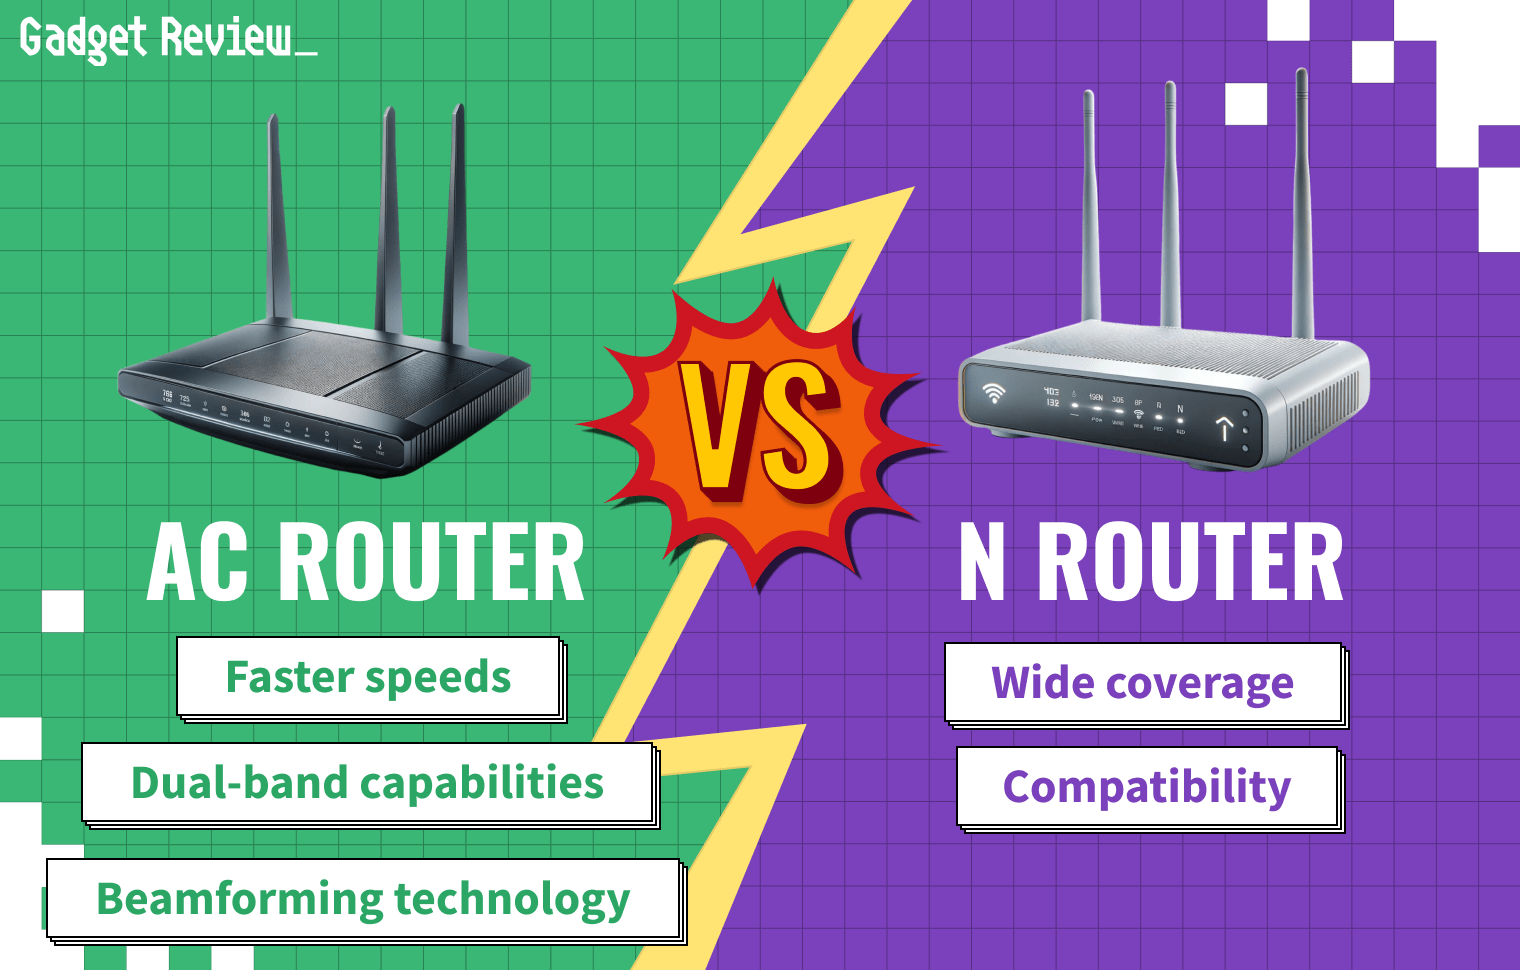 AC Router vs N Router